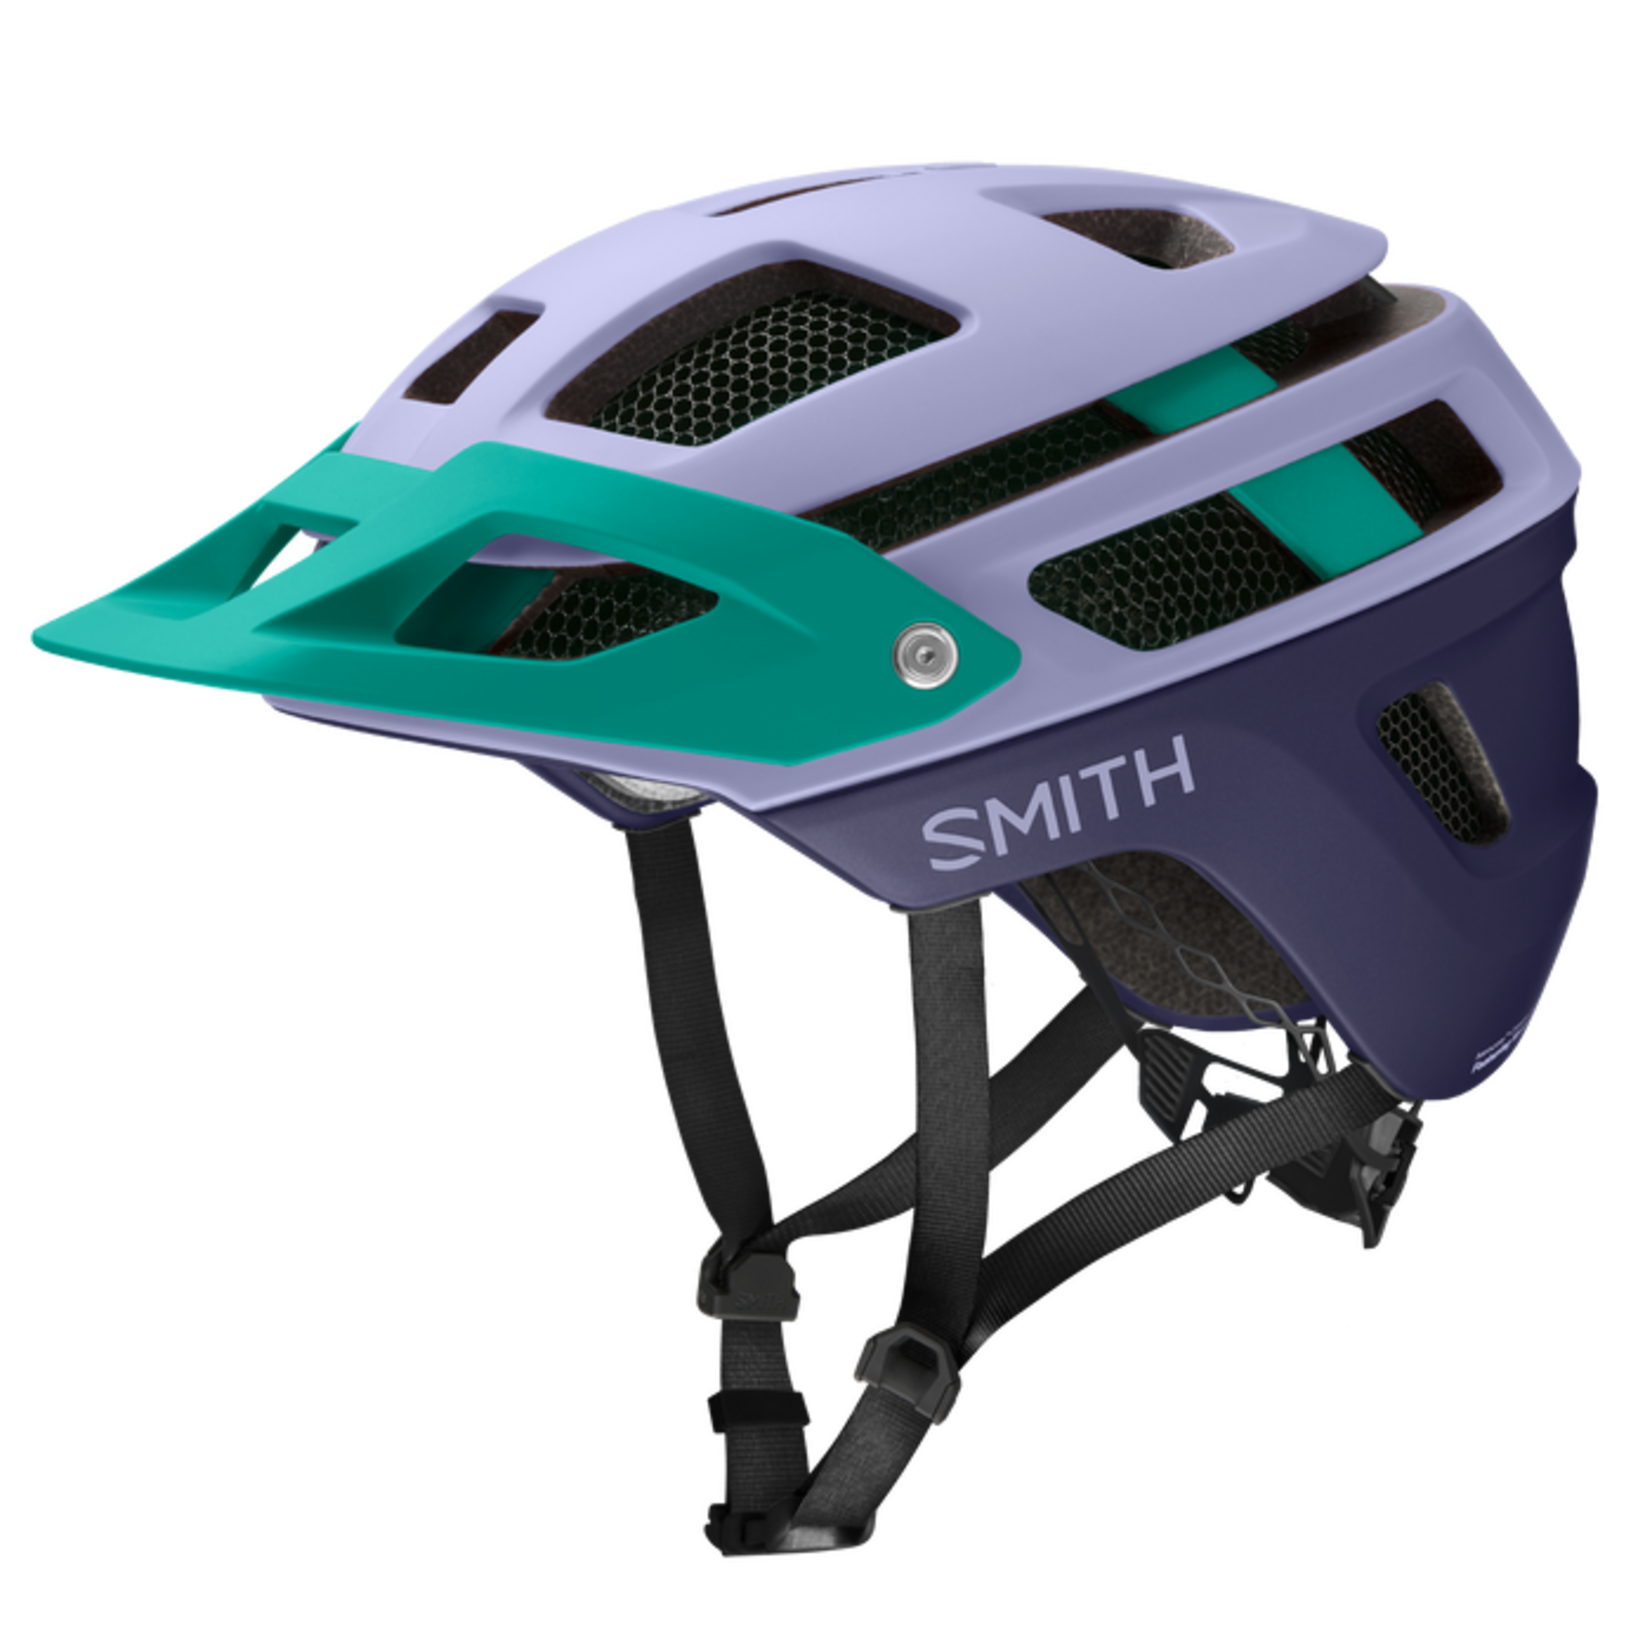 Smith Forefront 2 Helmet MIPS